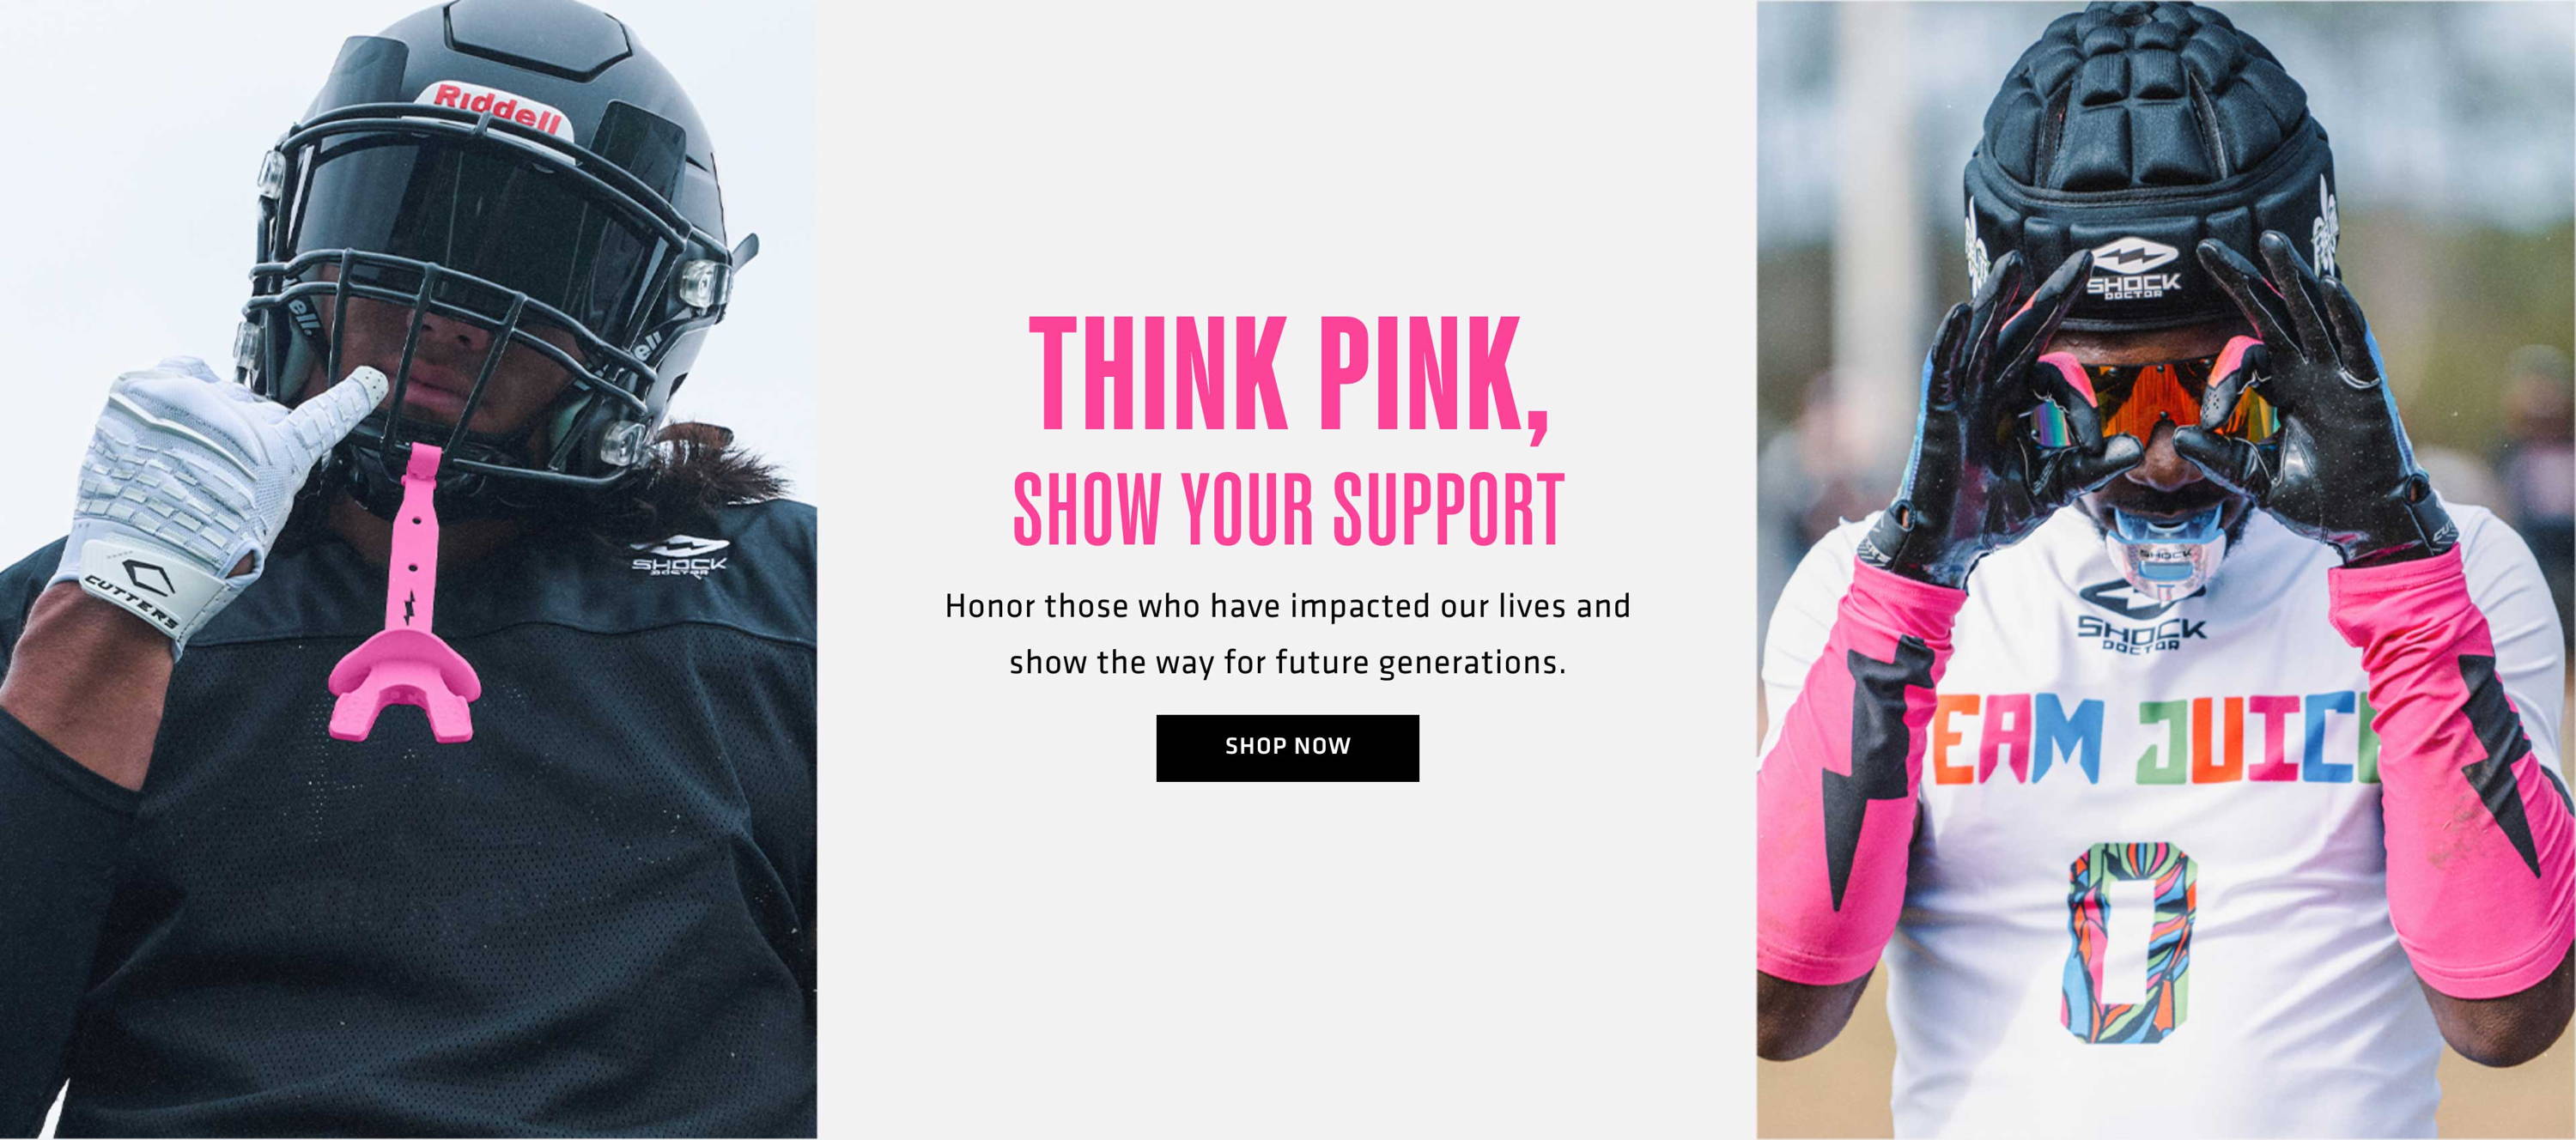 Think Pink, Show Your Support - Honor those who have impacted our lives and show the way for future generations. | SHOP NOW